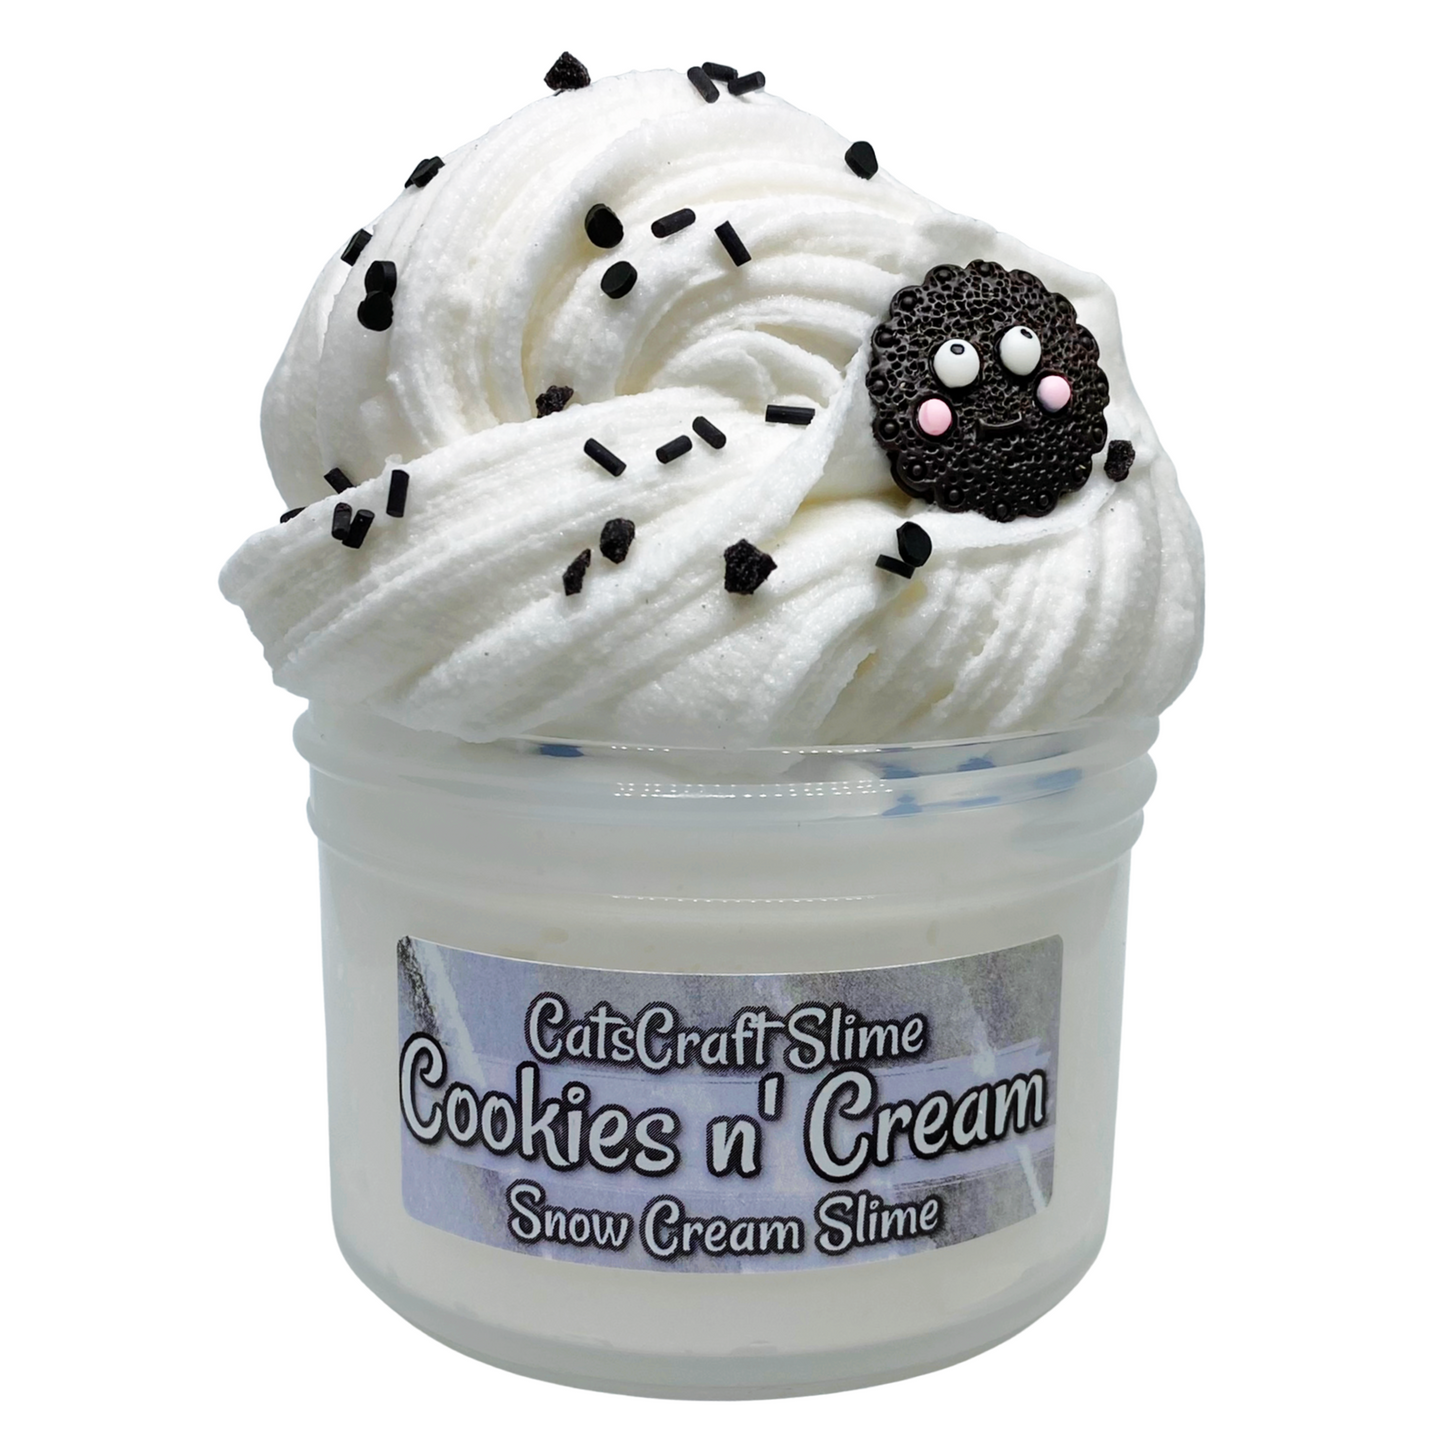 Snow Cream Slime "Cookies n' Cream" Sprinkles Scented with Charm and Inflating Soft ASMR